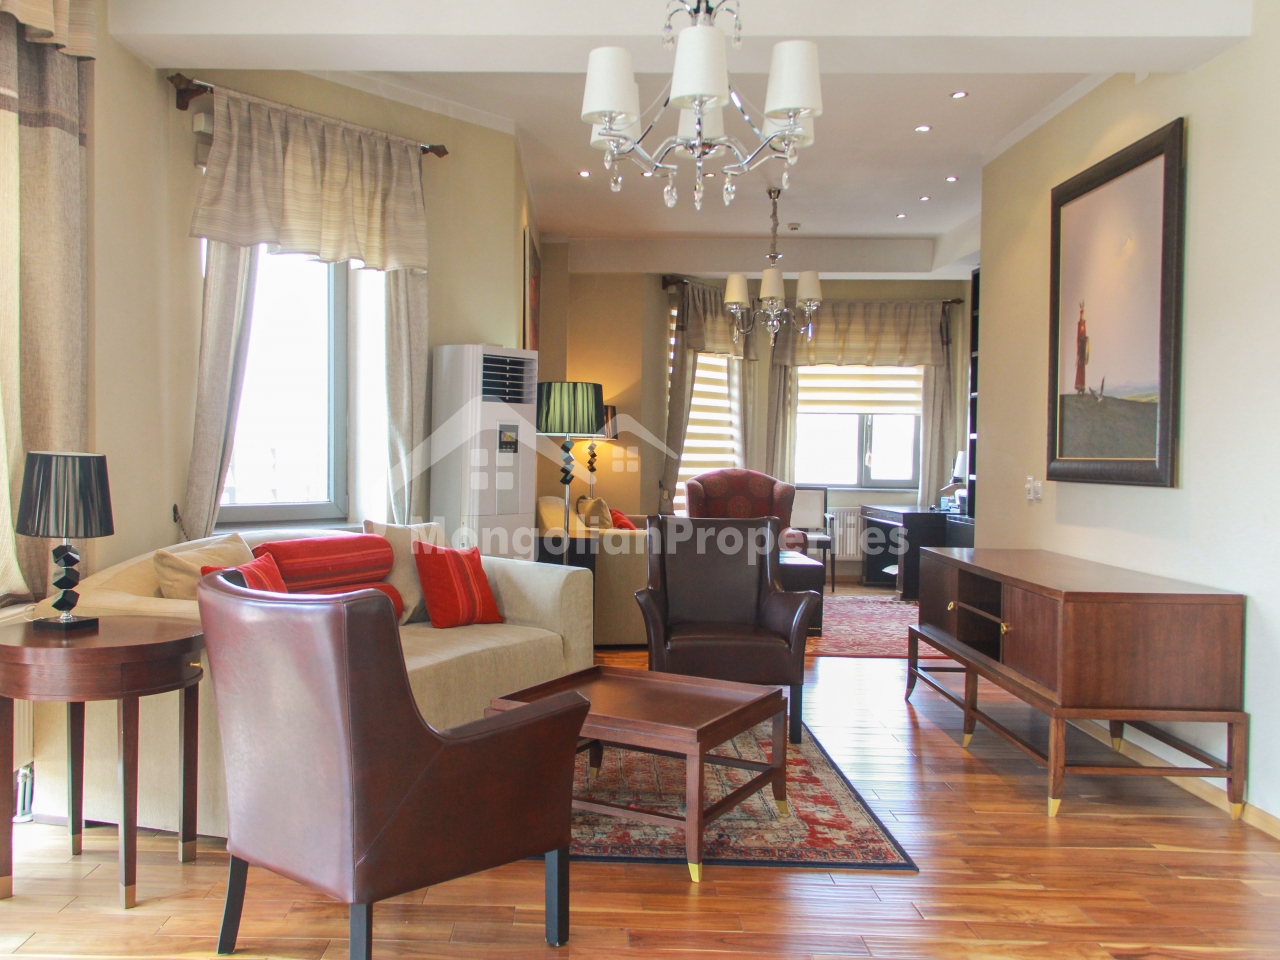 FOR RENT: Fully furnished 2 bedrooms apartment with fantastic view in Regency Residence